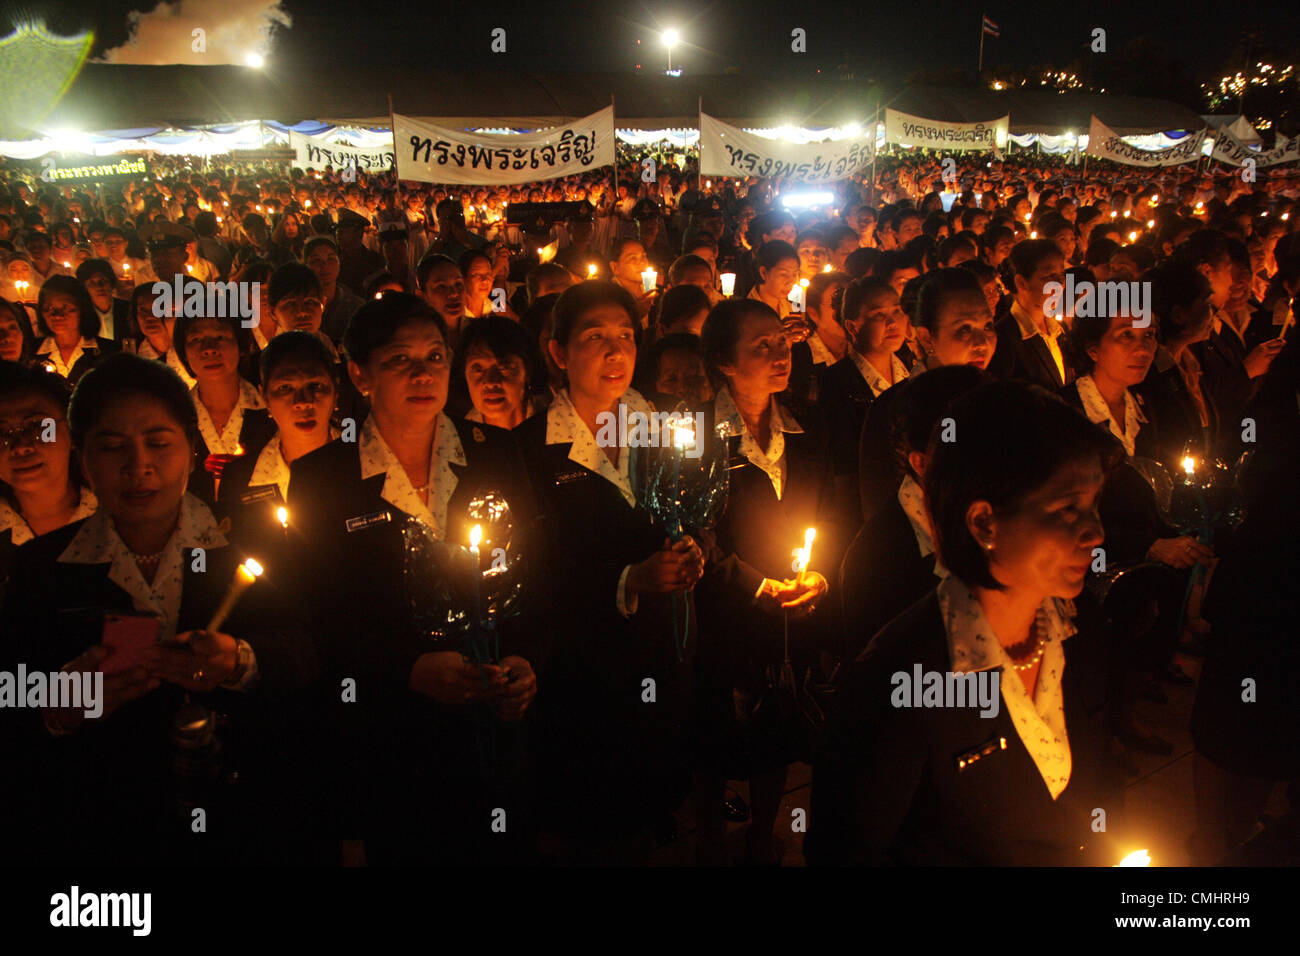 The Royal Field , Bangkok , Thailand , August 12 , 2012 .Thai people hold up a candles during a ceremony .Thais nationwide celebrate Her Majesty the Queen's 80th birthday with numerous celebrations and ceremonies. Stock Photo